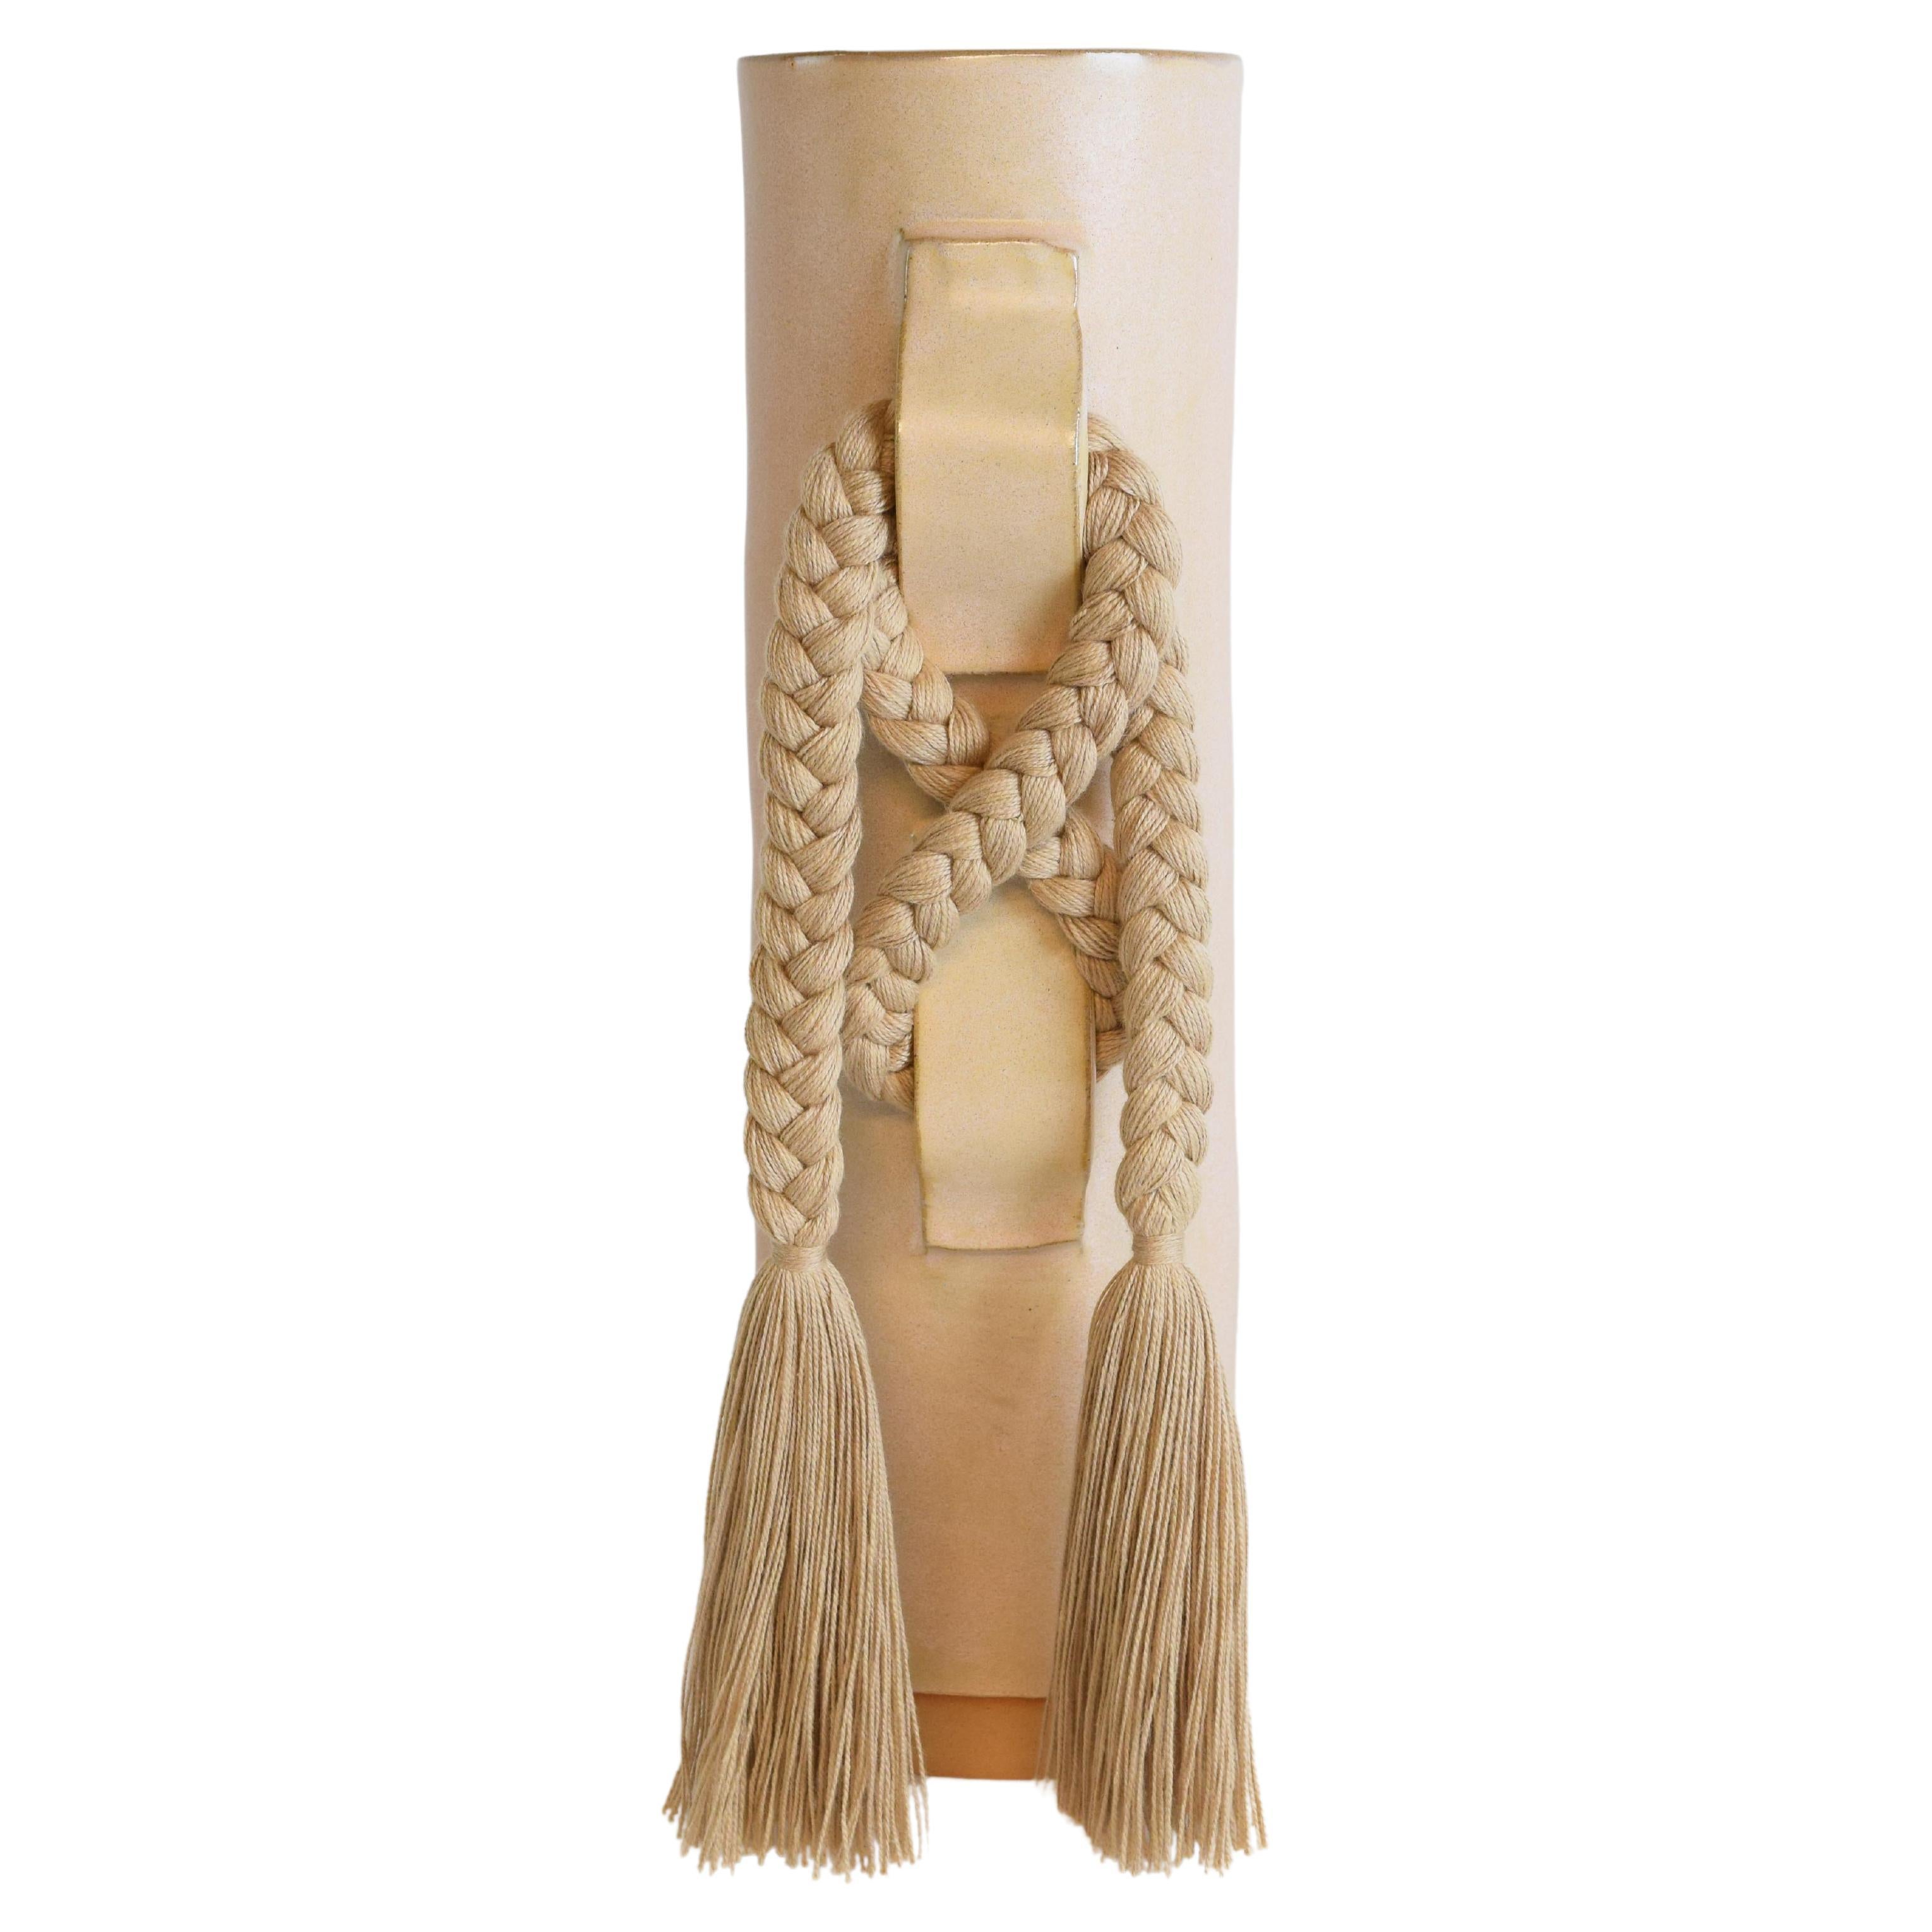 Handmade Ceramic Vase #696 in Satin Tan with Tan Cotton Braid and Fringe For Sale